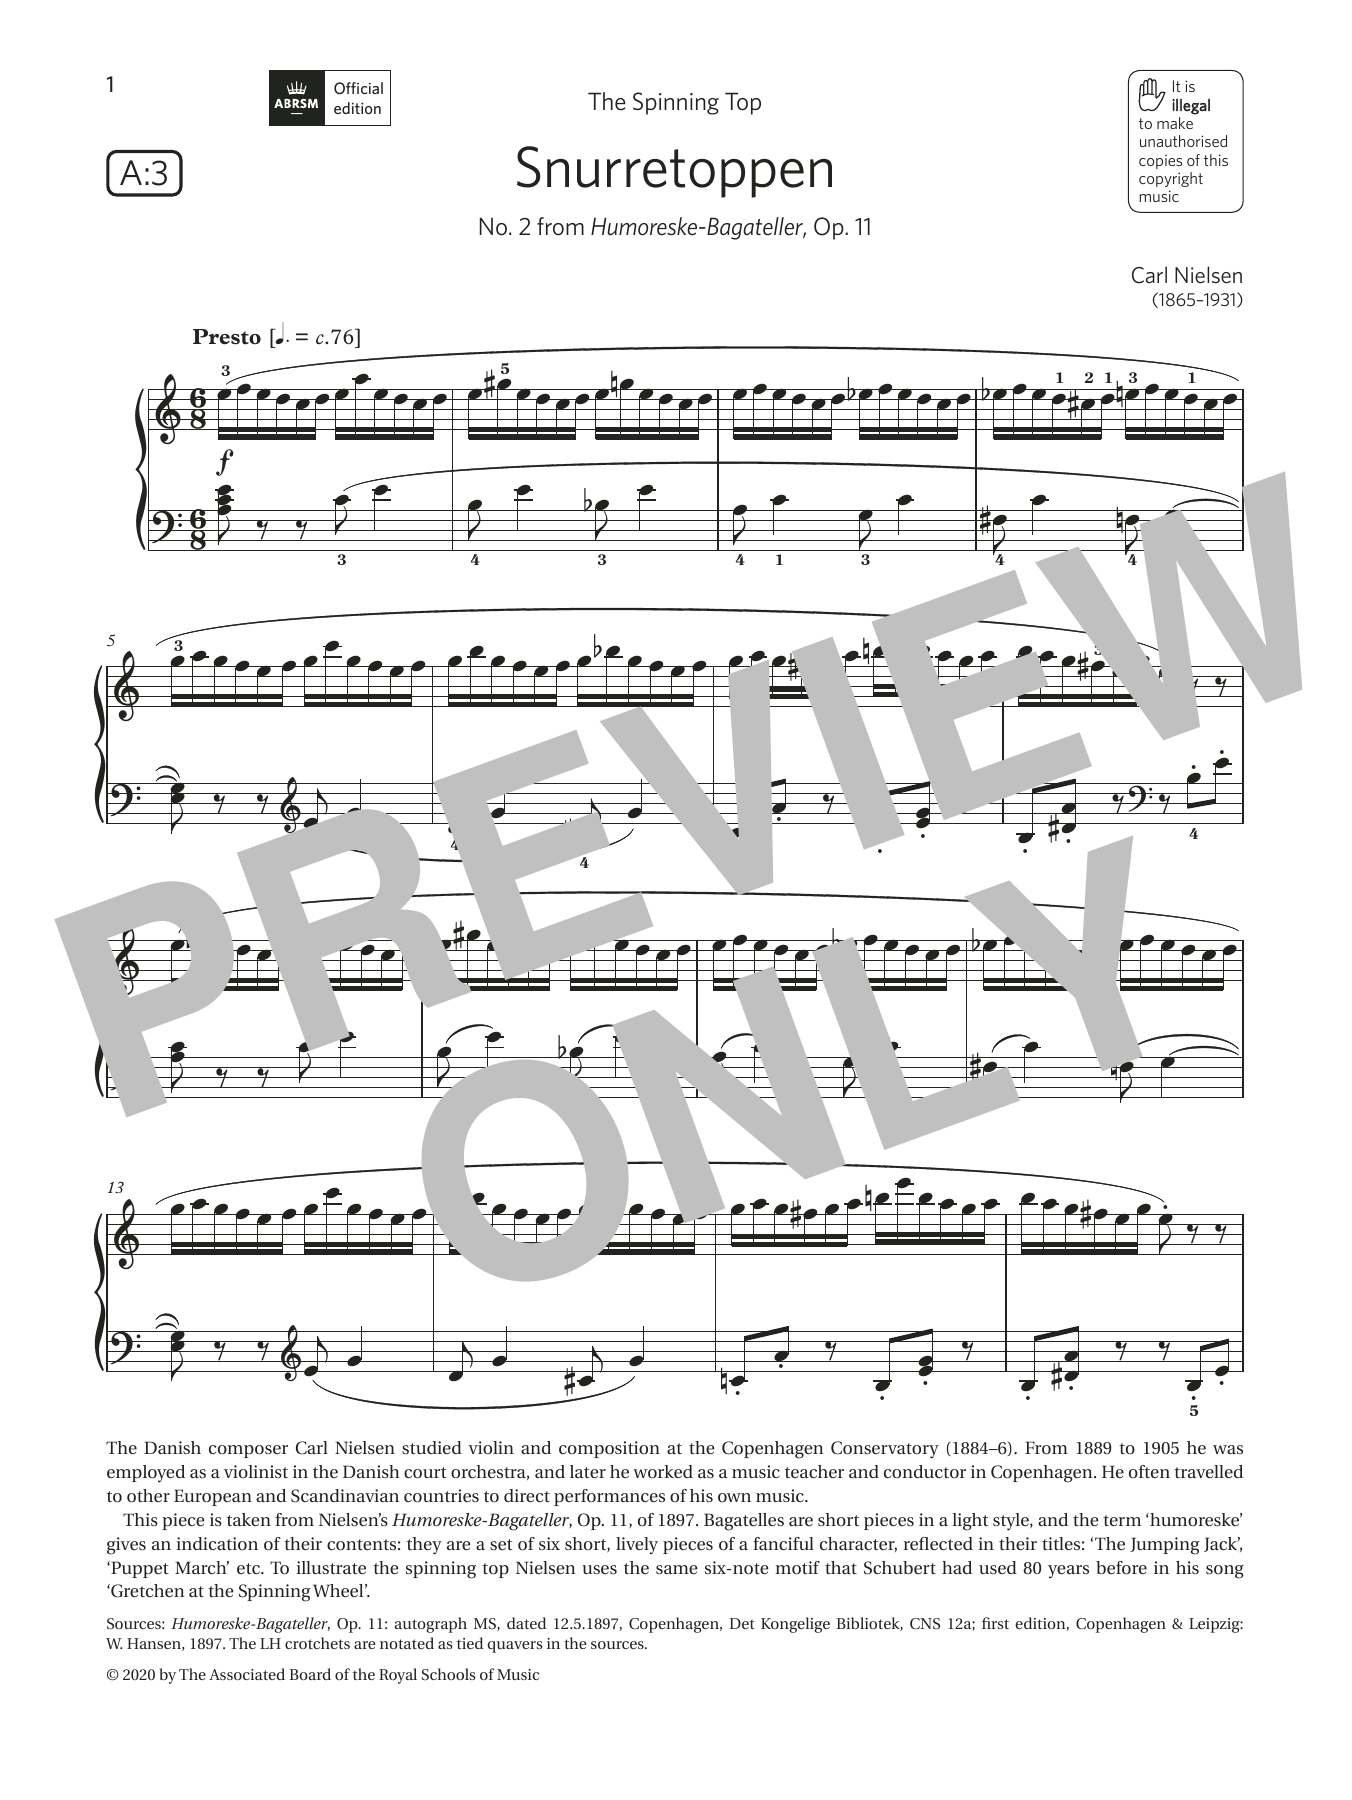 Download Carl Nielsen Snurretoppen (Grade 6, list A3, from th Sheet Music